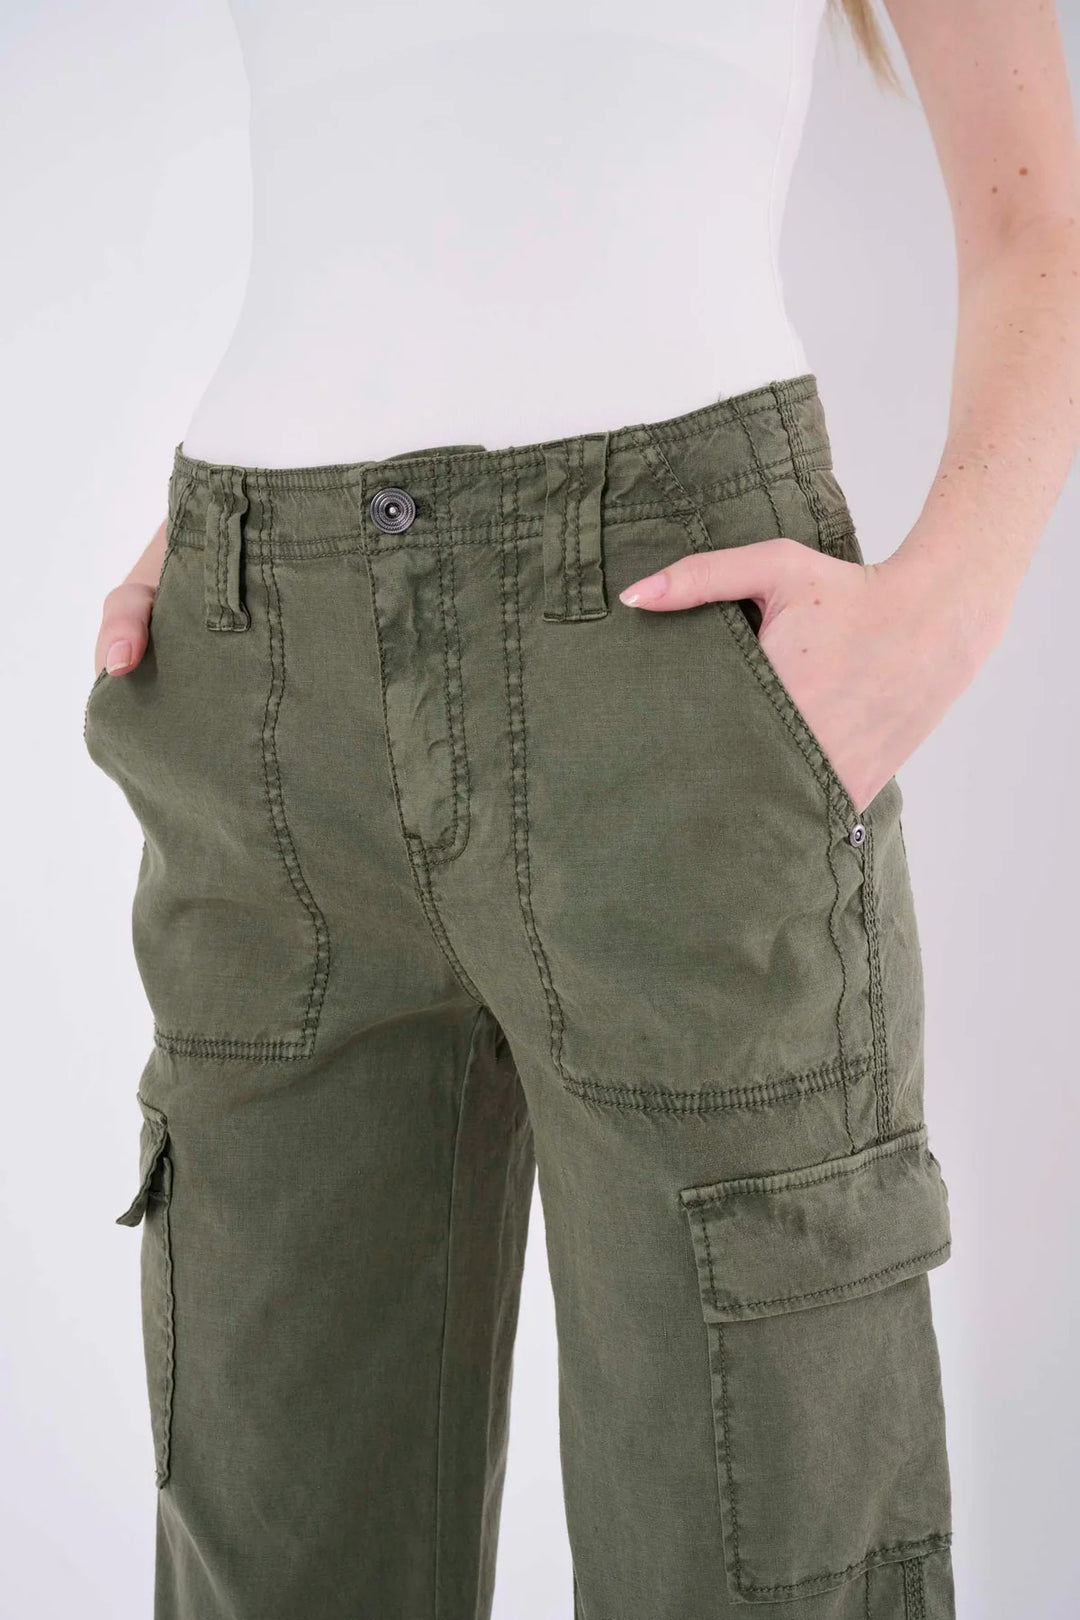 Marrakech Aly Cargo Pant in Moss